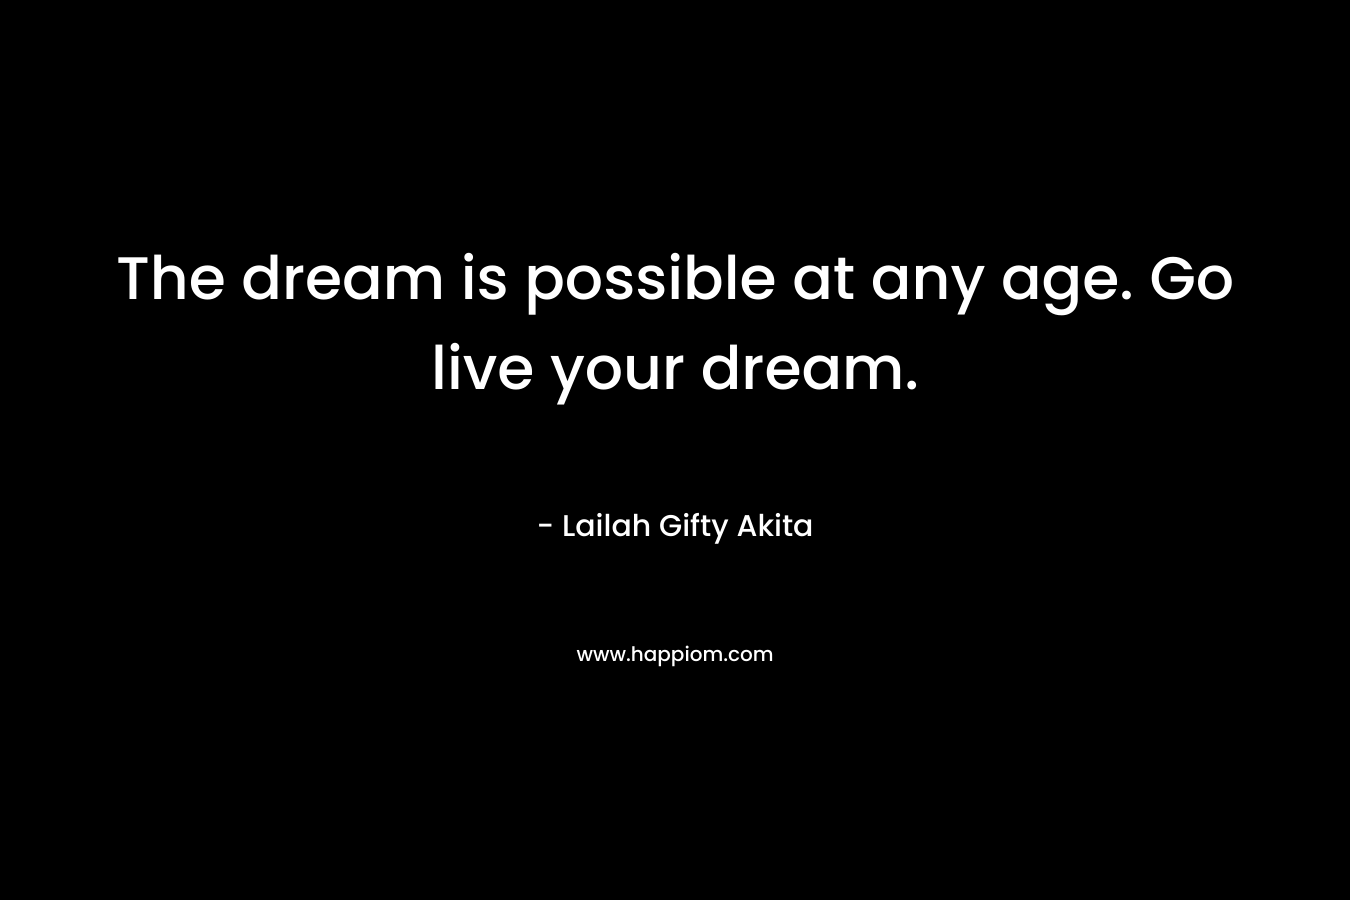 The dream is possible at any age. Go live your dream.